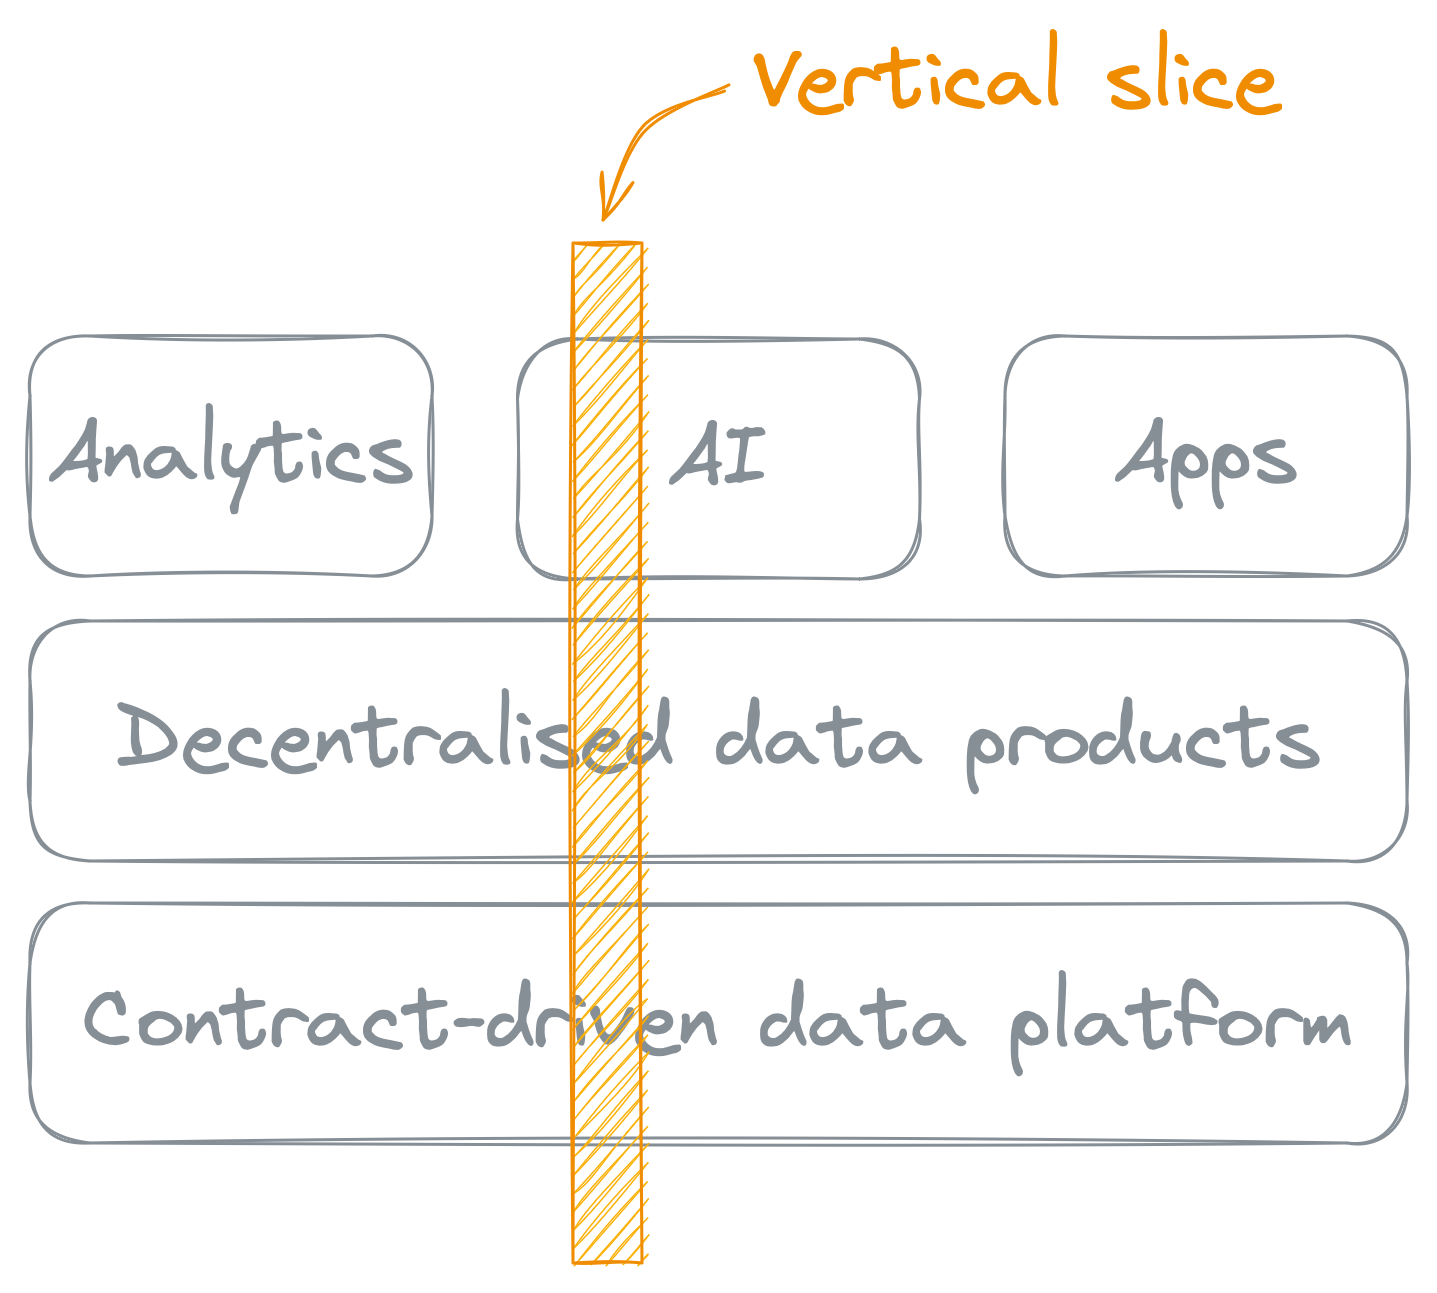 A diagram showing a vertical slice over Contract-driven data platform, Decentralised data products, with Analytics, AI, and Apps at the top.